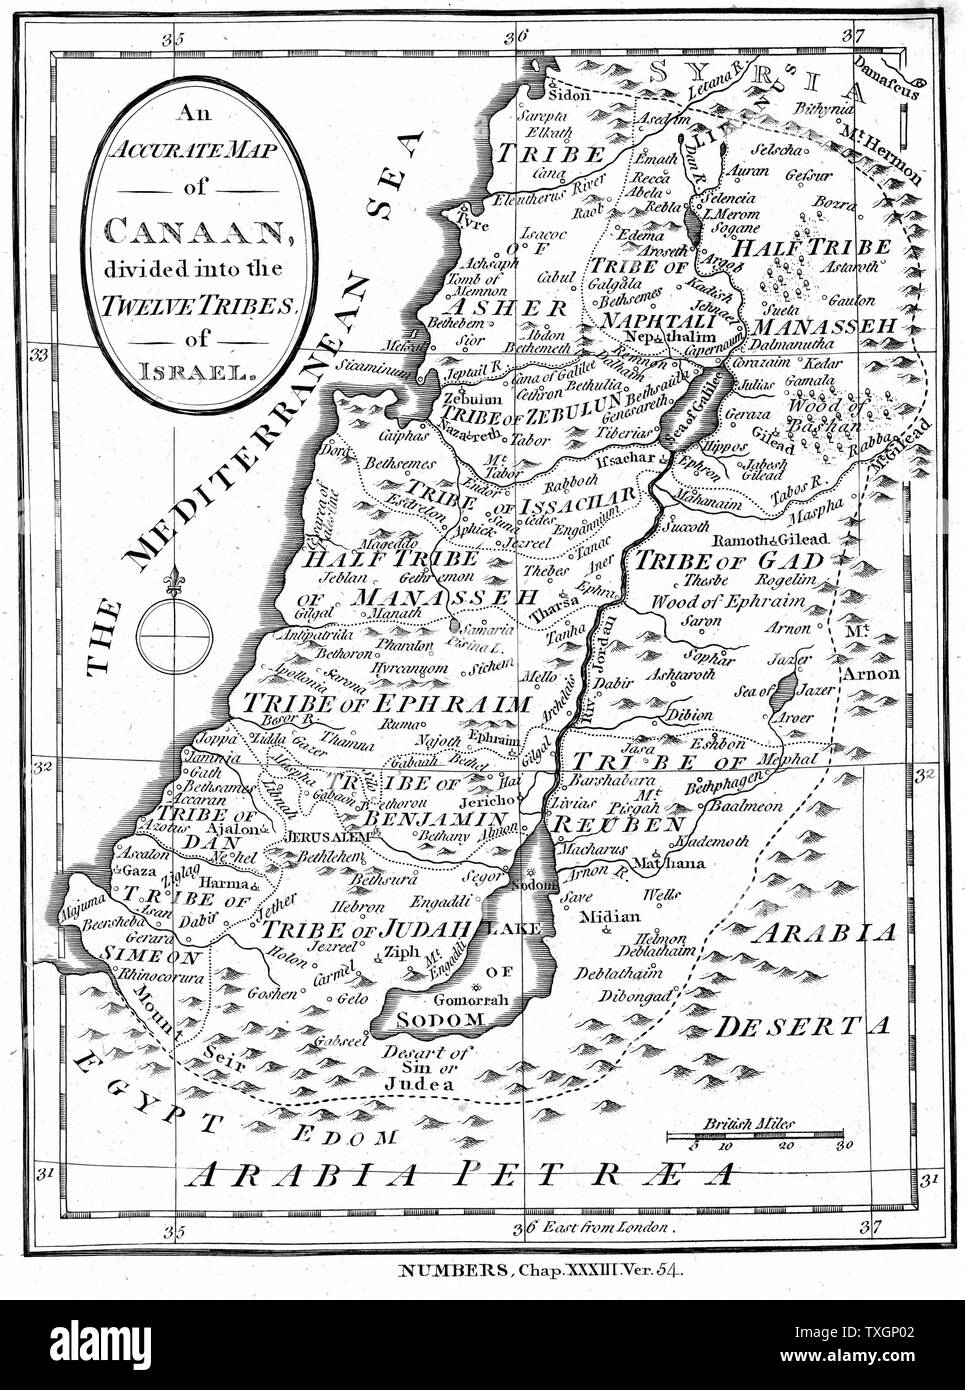 Map of Canaan divided into the territories of the Twelve Tribes of Israel as described in the 'Bible', Numbers 23:54.  c.1830 Engraving Stock Photo